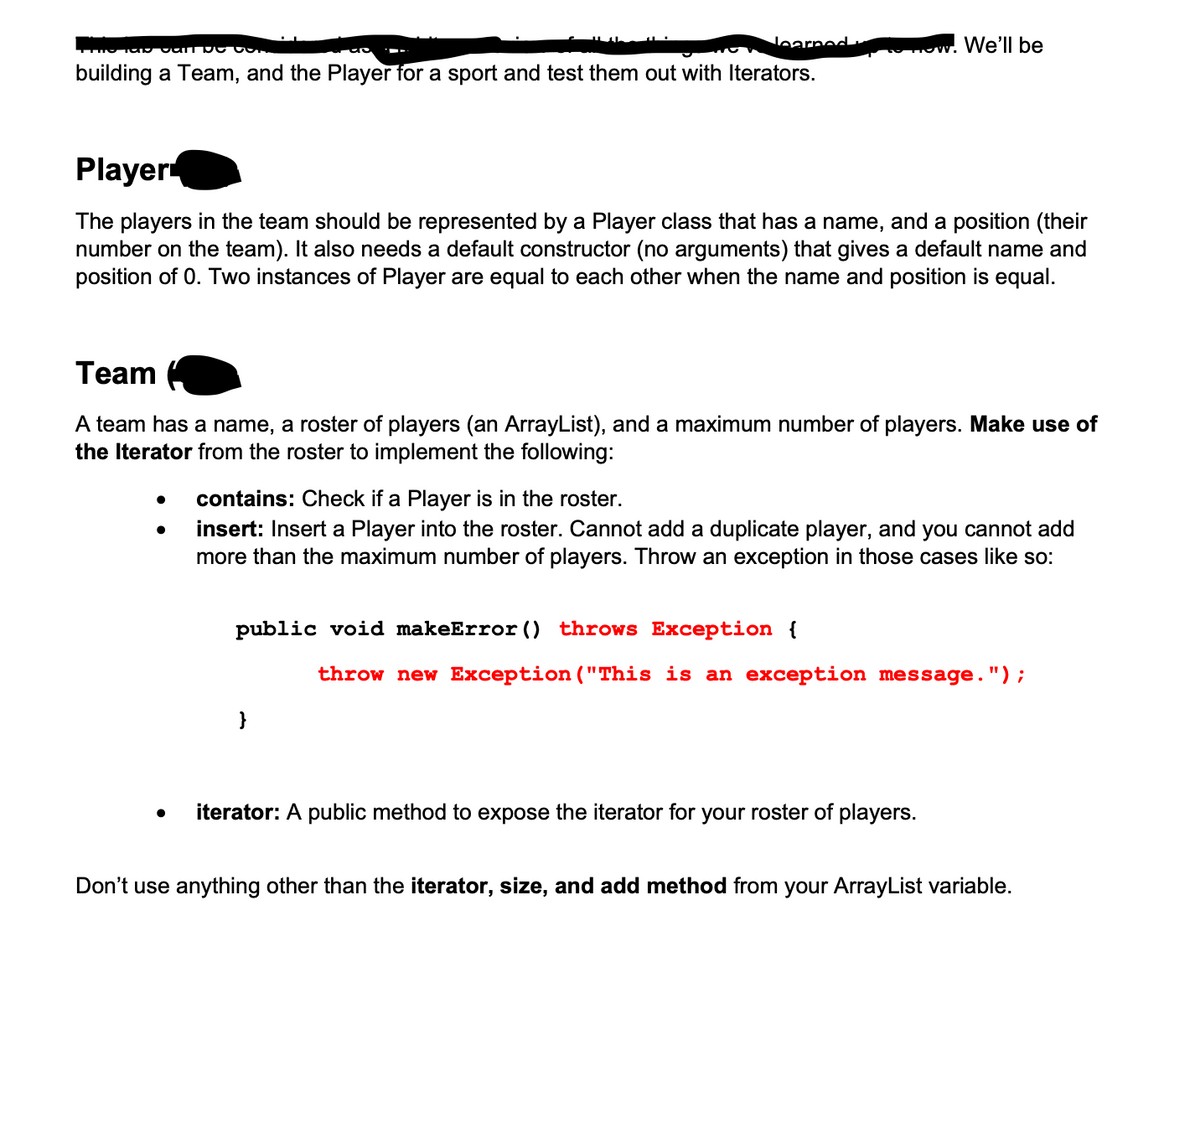 learned
building a Team, and the Player for a sport and test them out with Iterators.
Player
The players in the team should be represented by a Player class that has a name, and a position (their
number on the team). It also needs a default constructor (no arguments) that gives a default name and
position of 0. Two instances of Player are equal to each other when the name and position is equal.
Team
A team has a name, a roster of players (an ArrayList), and a maximum number of players. Make use of
the Iterator from the roster to implement the following:
We'll be
contains: Check if a Player is in the roster.
insert: Insert a Player into the roster. Cannot add a duplicate player, and you cannot add
more than the maximum number of players. Throw an exception in those cases like so:
public void makeError () throws Exception {
}
throw new Exception("This is an exception message.");
iterator: A public method to expose the iterator for your roster of players.
Don't use anything other than the iterator, size, and add method from your ArrayList variable.